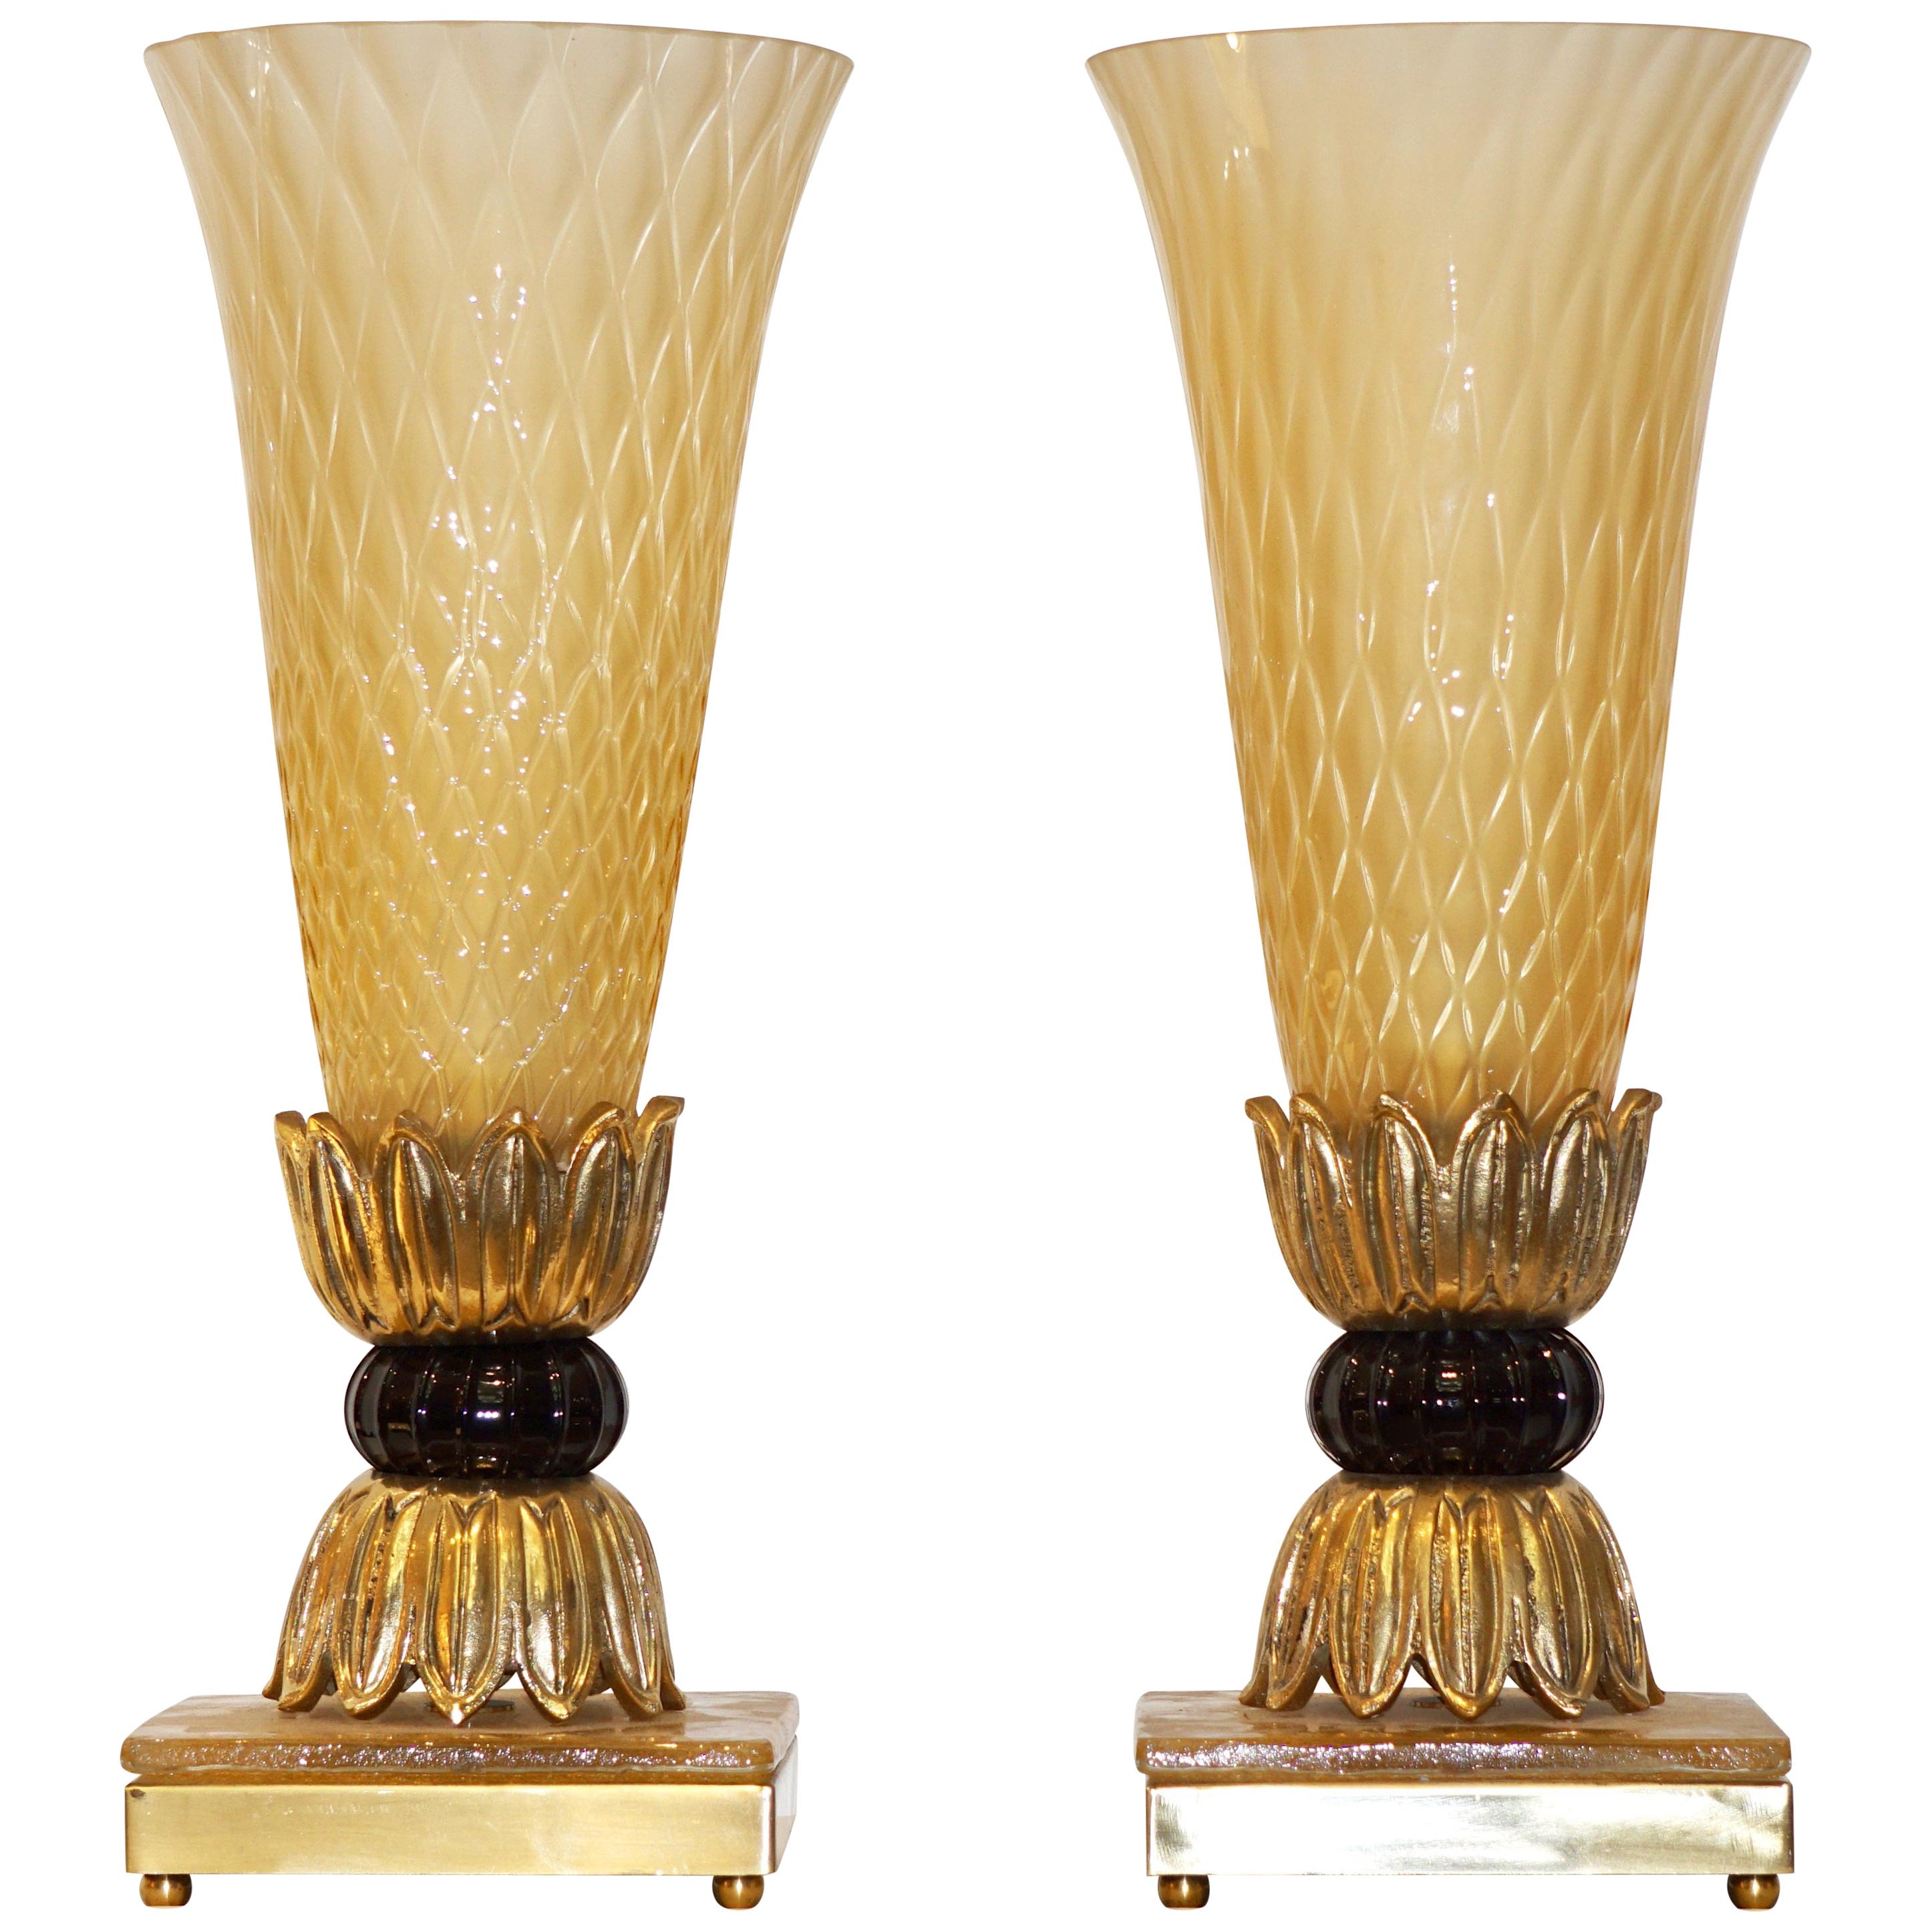 Barovier Toso Art Deco Style Pair of Brass and Gold Honeycomb Murano Glass Lamps